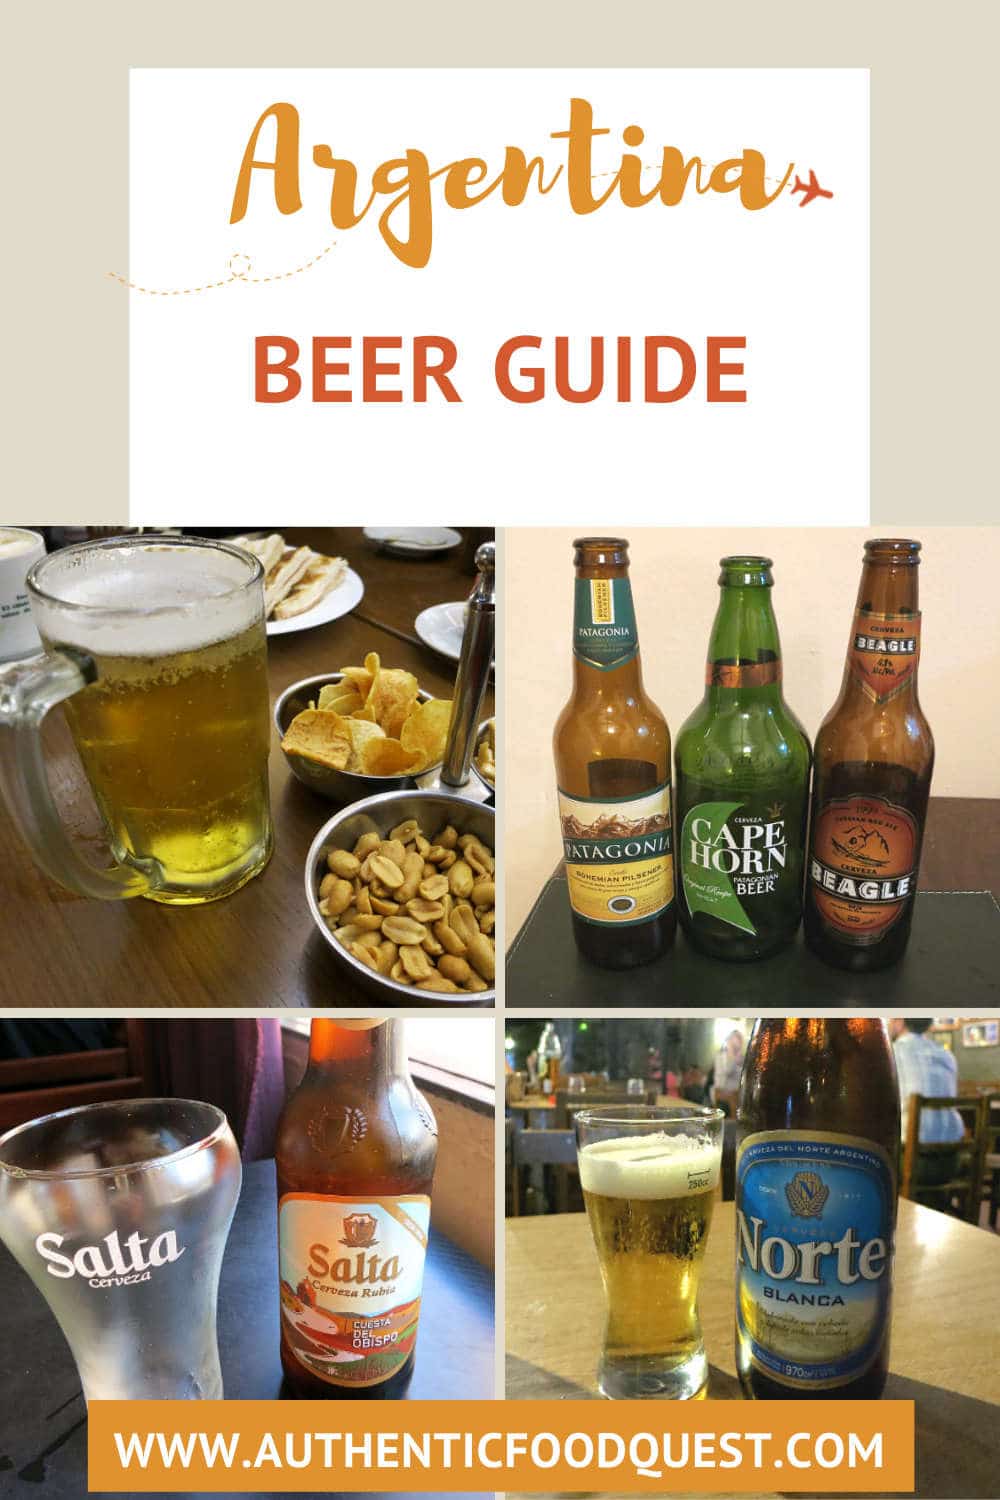 Argentina Beer: The Ultimate Guide That Will Make You Thirsty